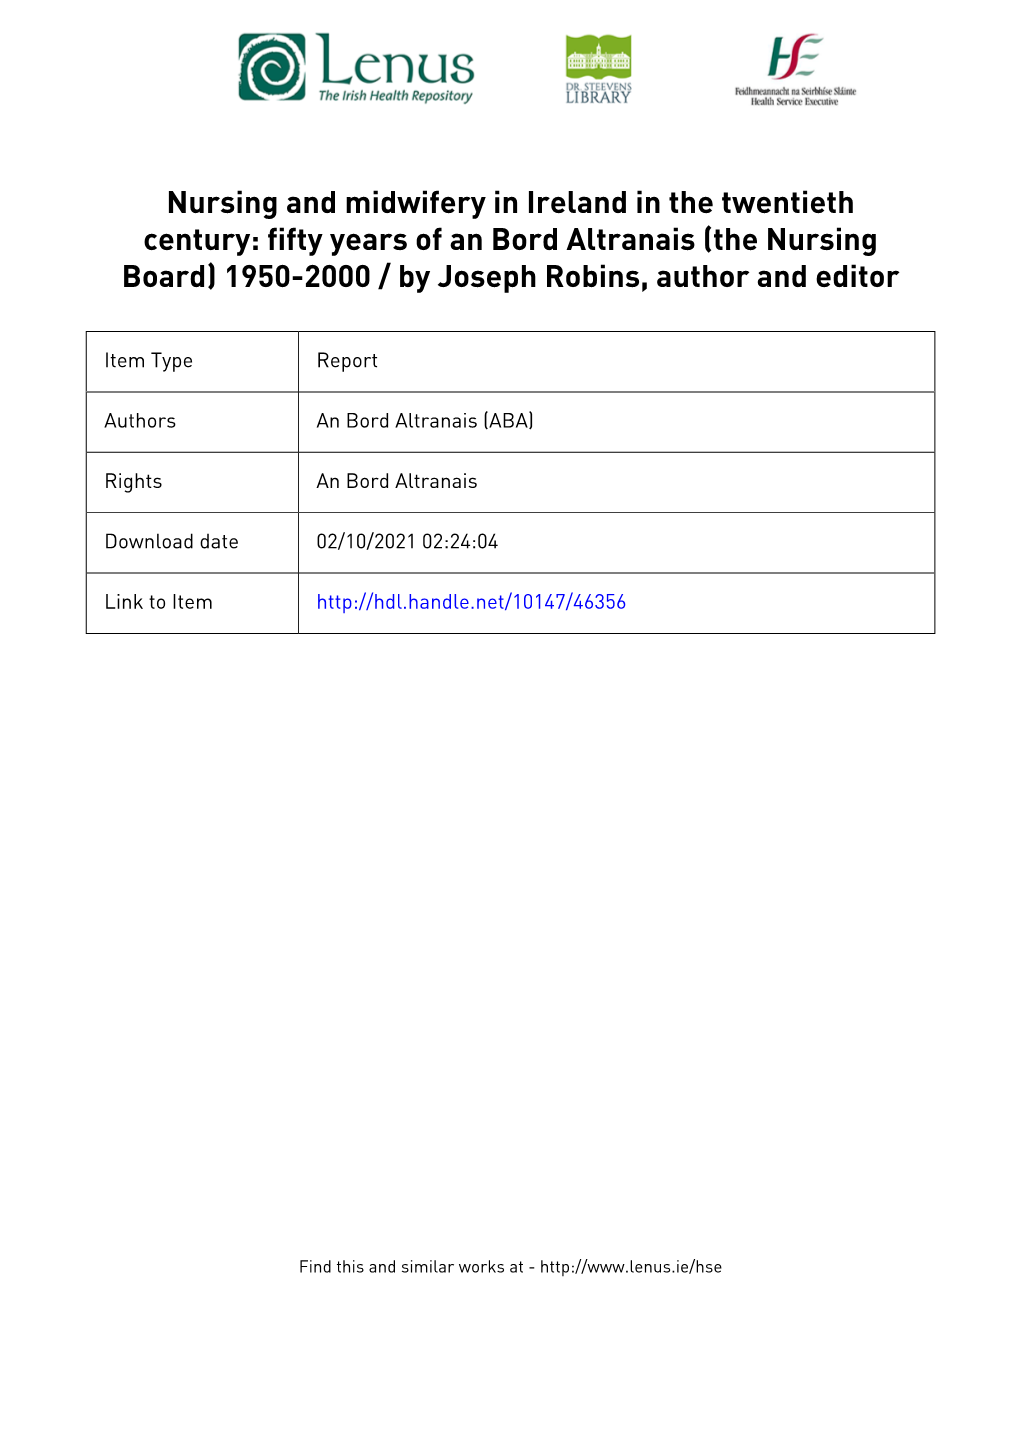 Nursing and Midwifery in Ireland in the Twentieth Century: Fifty Years of an Bord Altranais (The Nursing Board) 1950-2000 / by Joseph Robins, Author and Editor